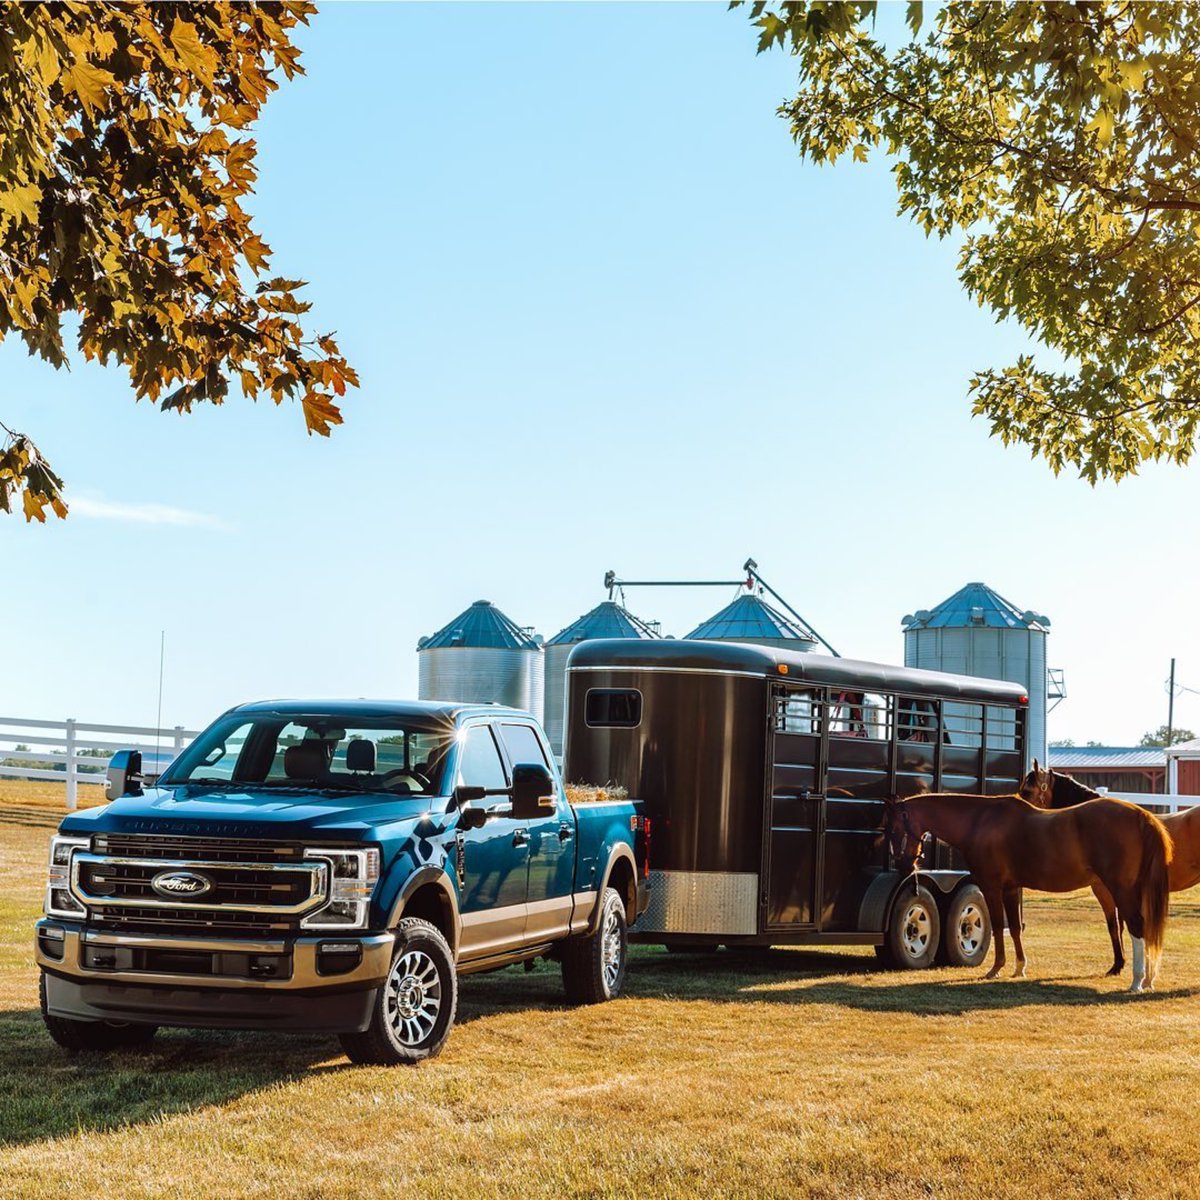 Behind every successful farm and ranch, there's a reliable truck that handles the heavy lifting and gets the job done. We're curious, what's your work truck? 

#TeamAutoGroup
#Farm
#Ranch
#WorkTruck